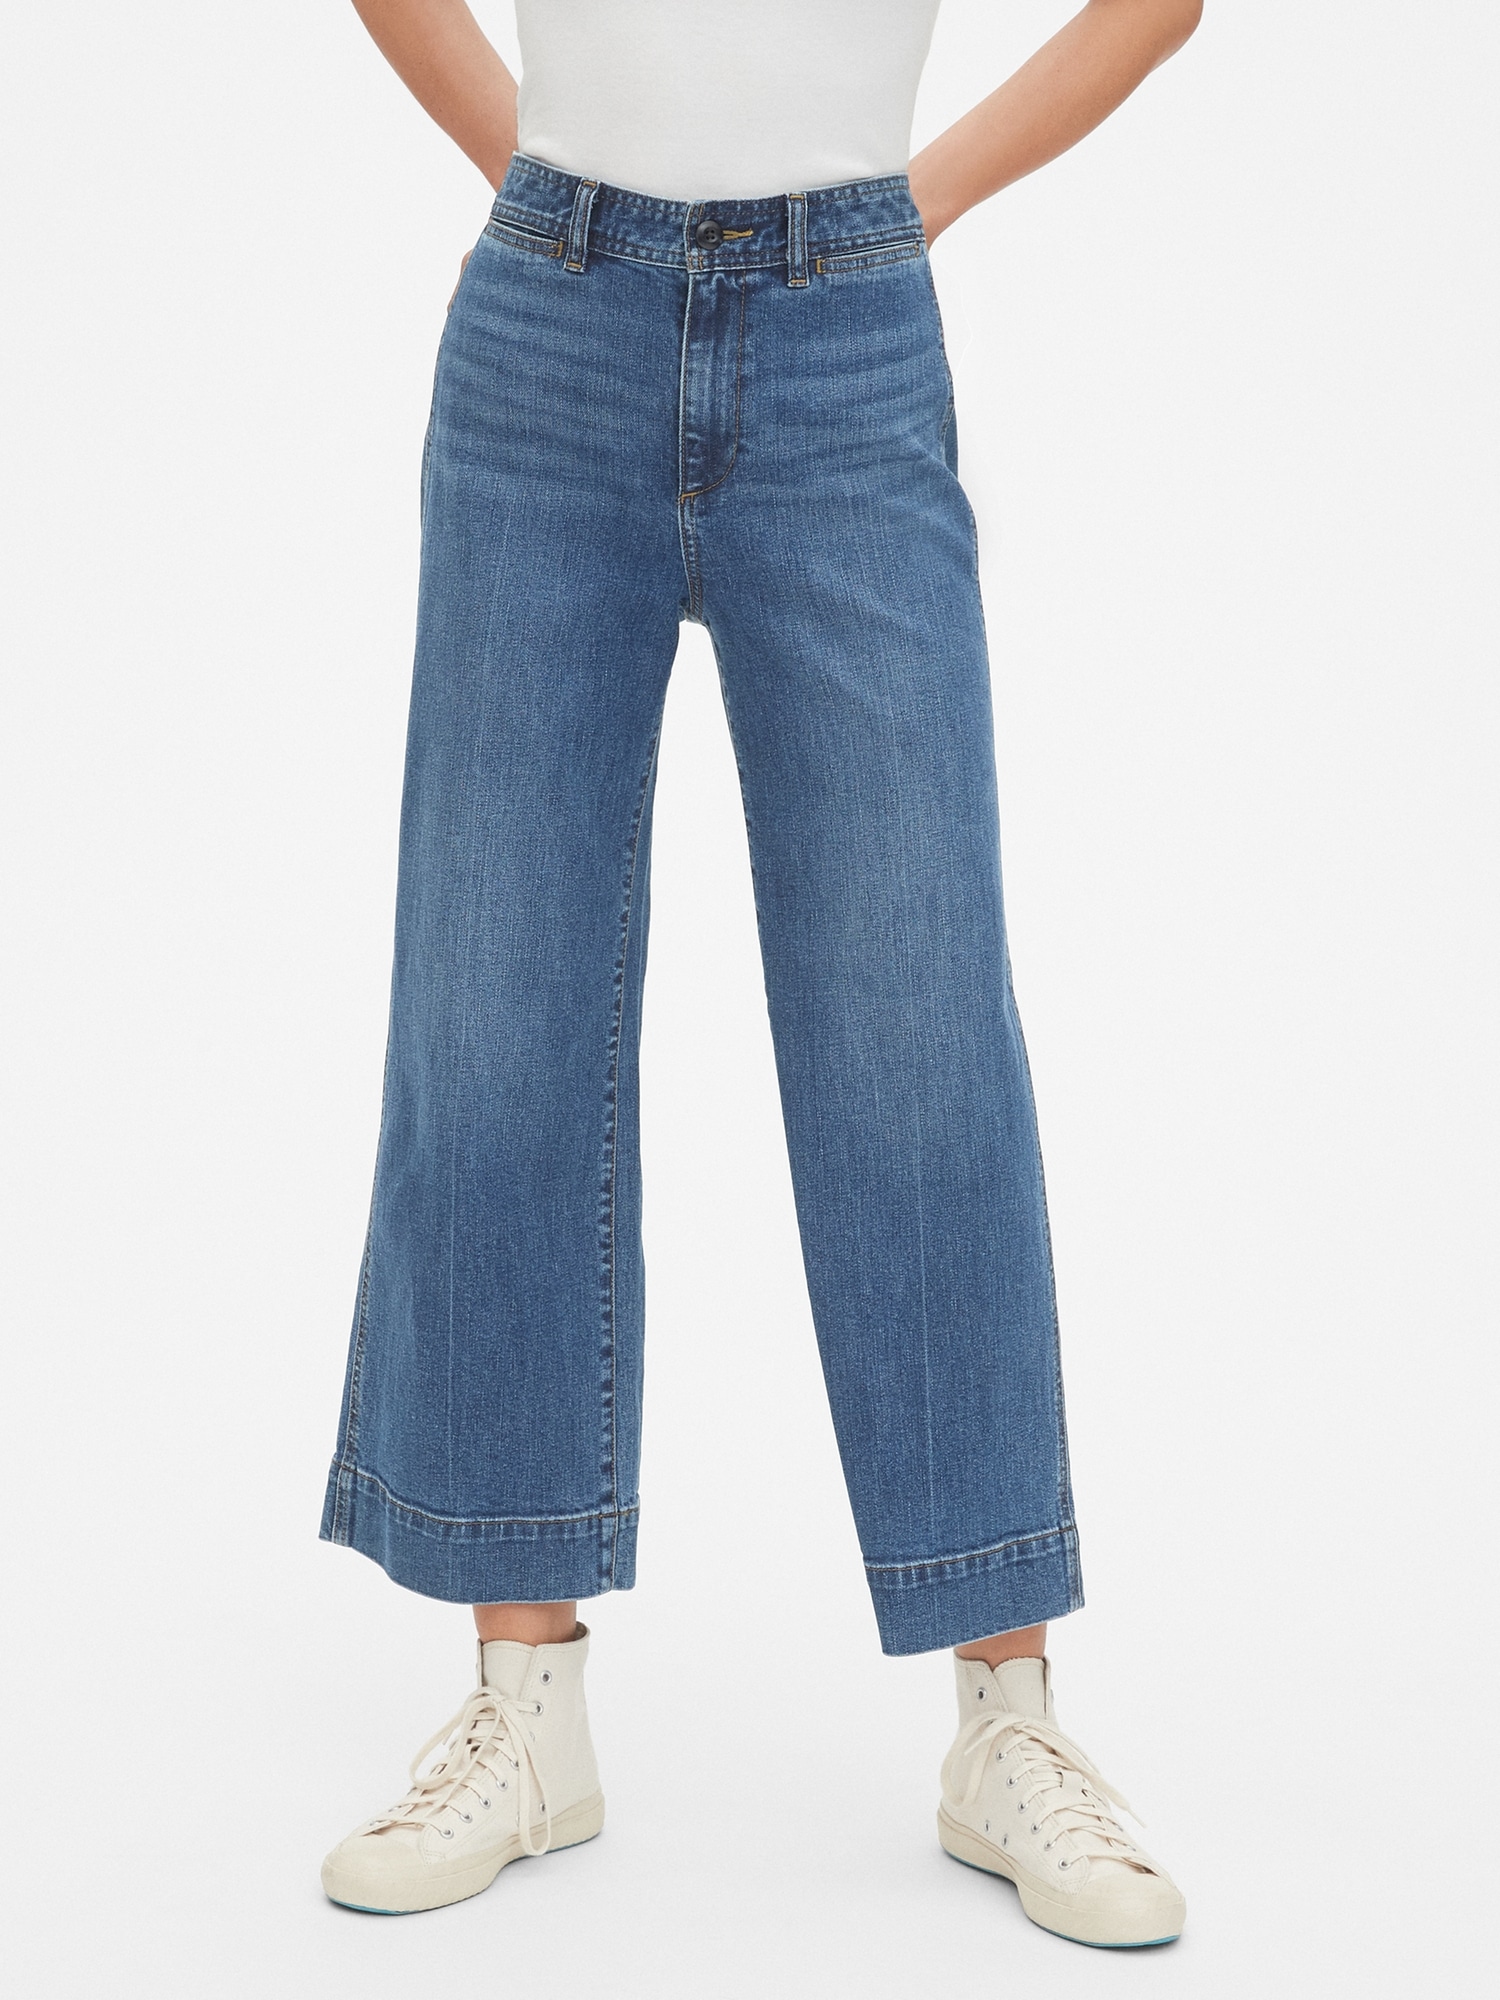 Jeans Cropped By Gap Size: 16